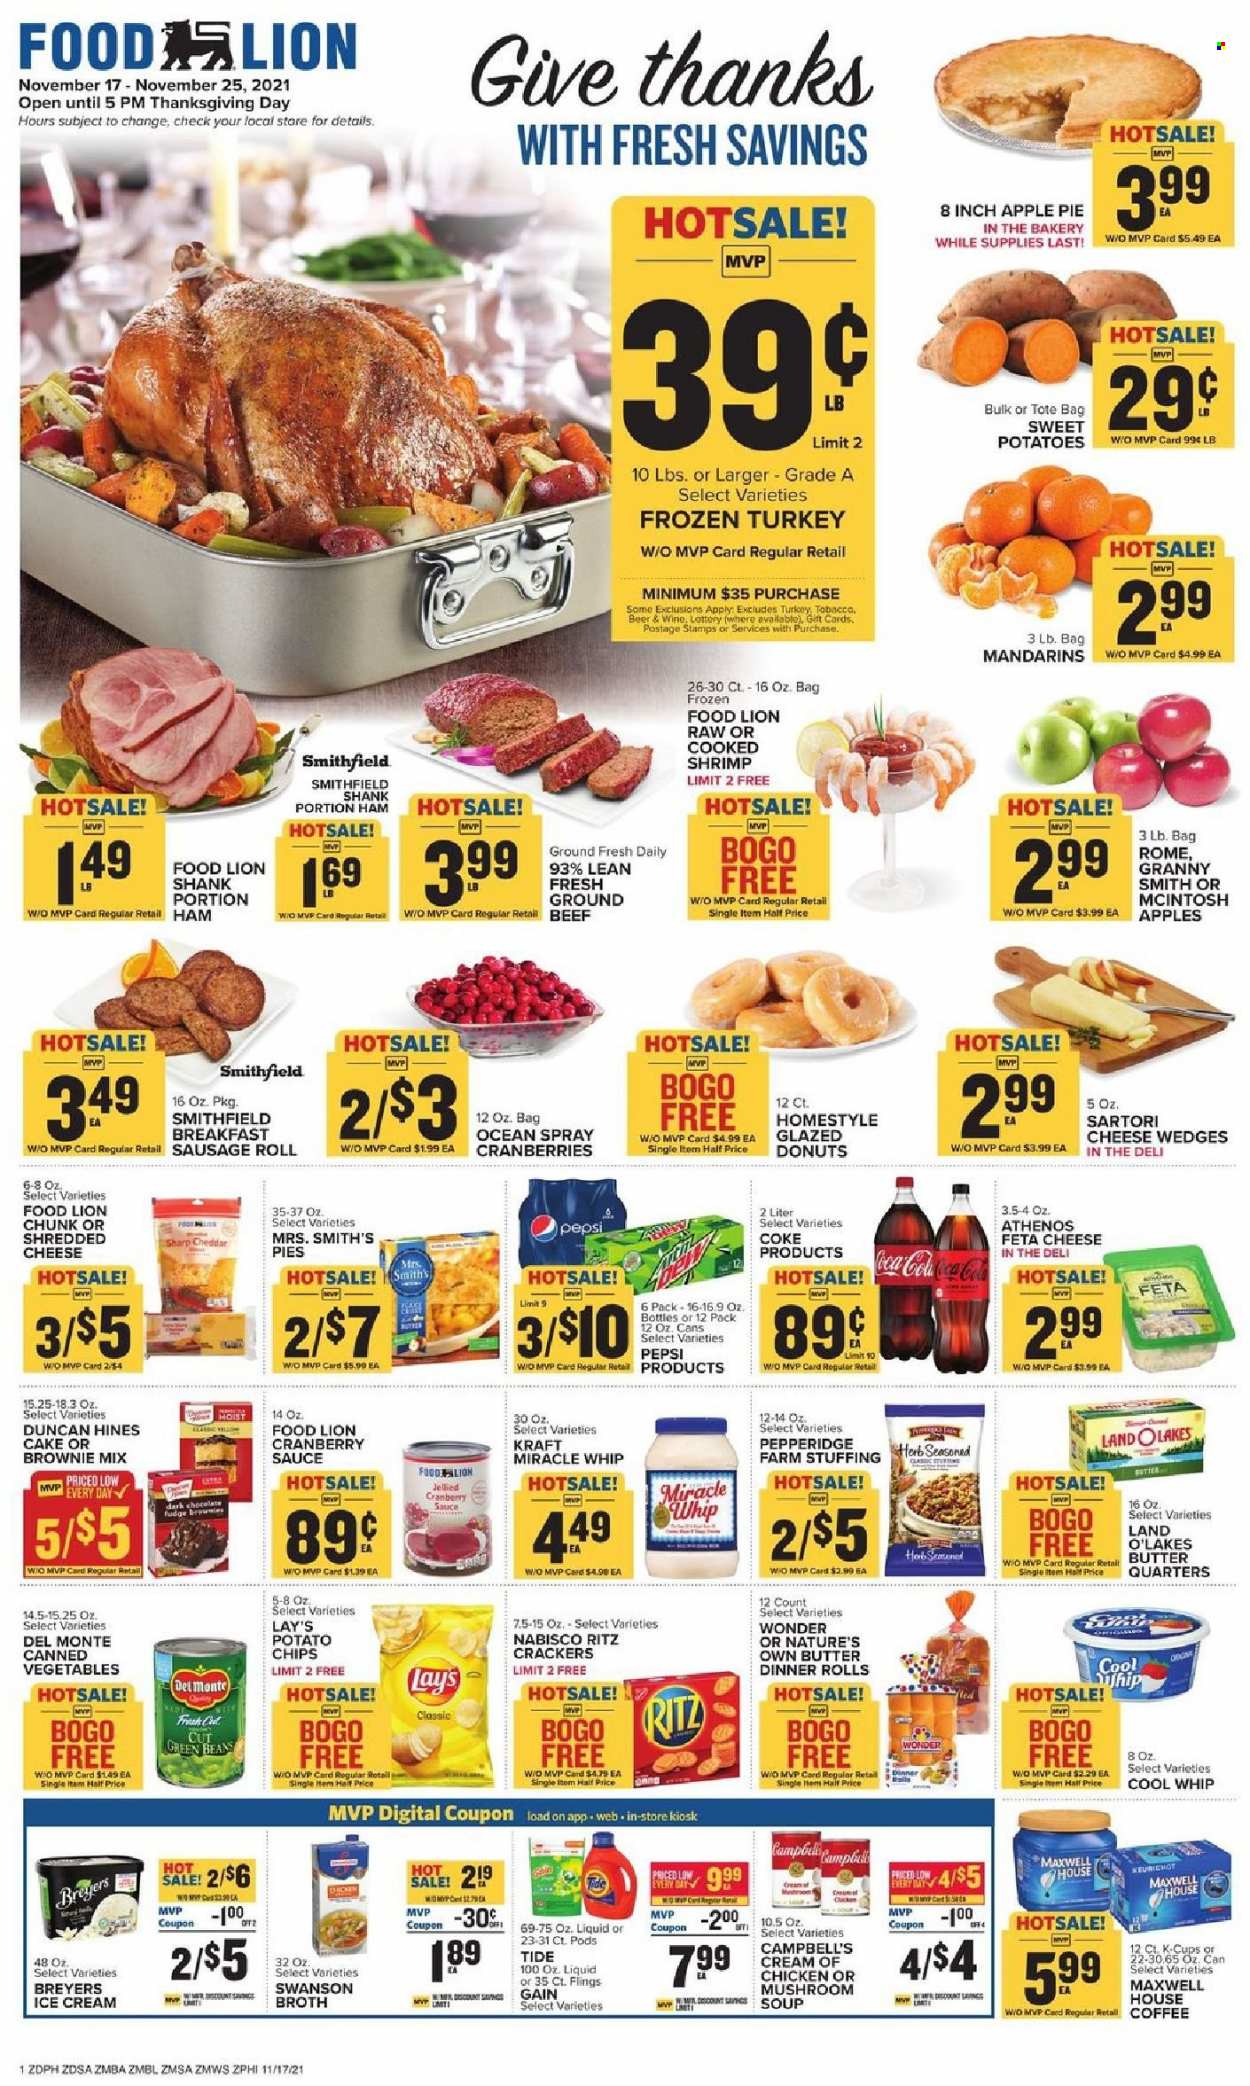 thumbnail - Food Lion Flyer - 11/17/2021 - 11/25/2021 - Sales products - sausage rolls, cake, pie, dinner rolls, apple pie, donut, brownie mix, green beans, sweet potato, mandarines, Granny Smith, shrimps, Campbell's, soup, sauce, Kraft®, ham, sausage, shredded cheese, feta, butter, Cool Whip, Miracle Whip, ice cream, fudge, crackers, RITZ, potato chips, Lay’s, Smith's, broth, cranberries, canned vegetables, herbs, cranberry sauce, Coca-Cola, Pepsi, Maxwell House, coffee, coffee capsules, K-Cups, beer, whole turkey, Gain, Tide, Nature's Own. Page 1.